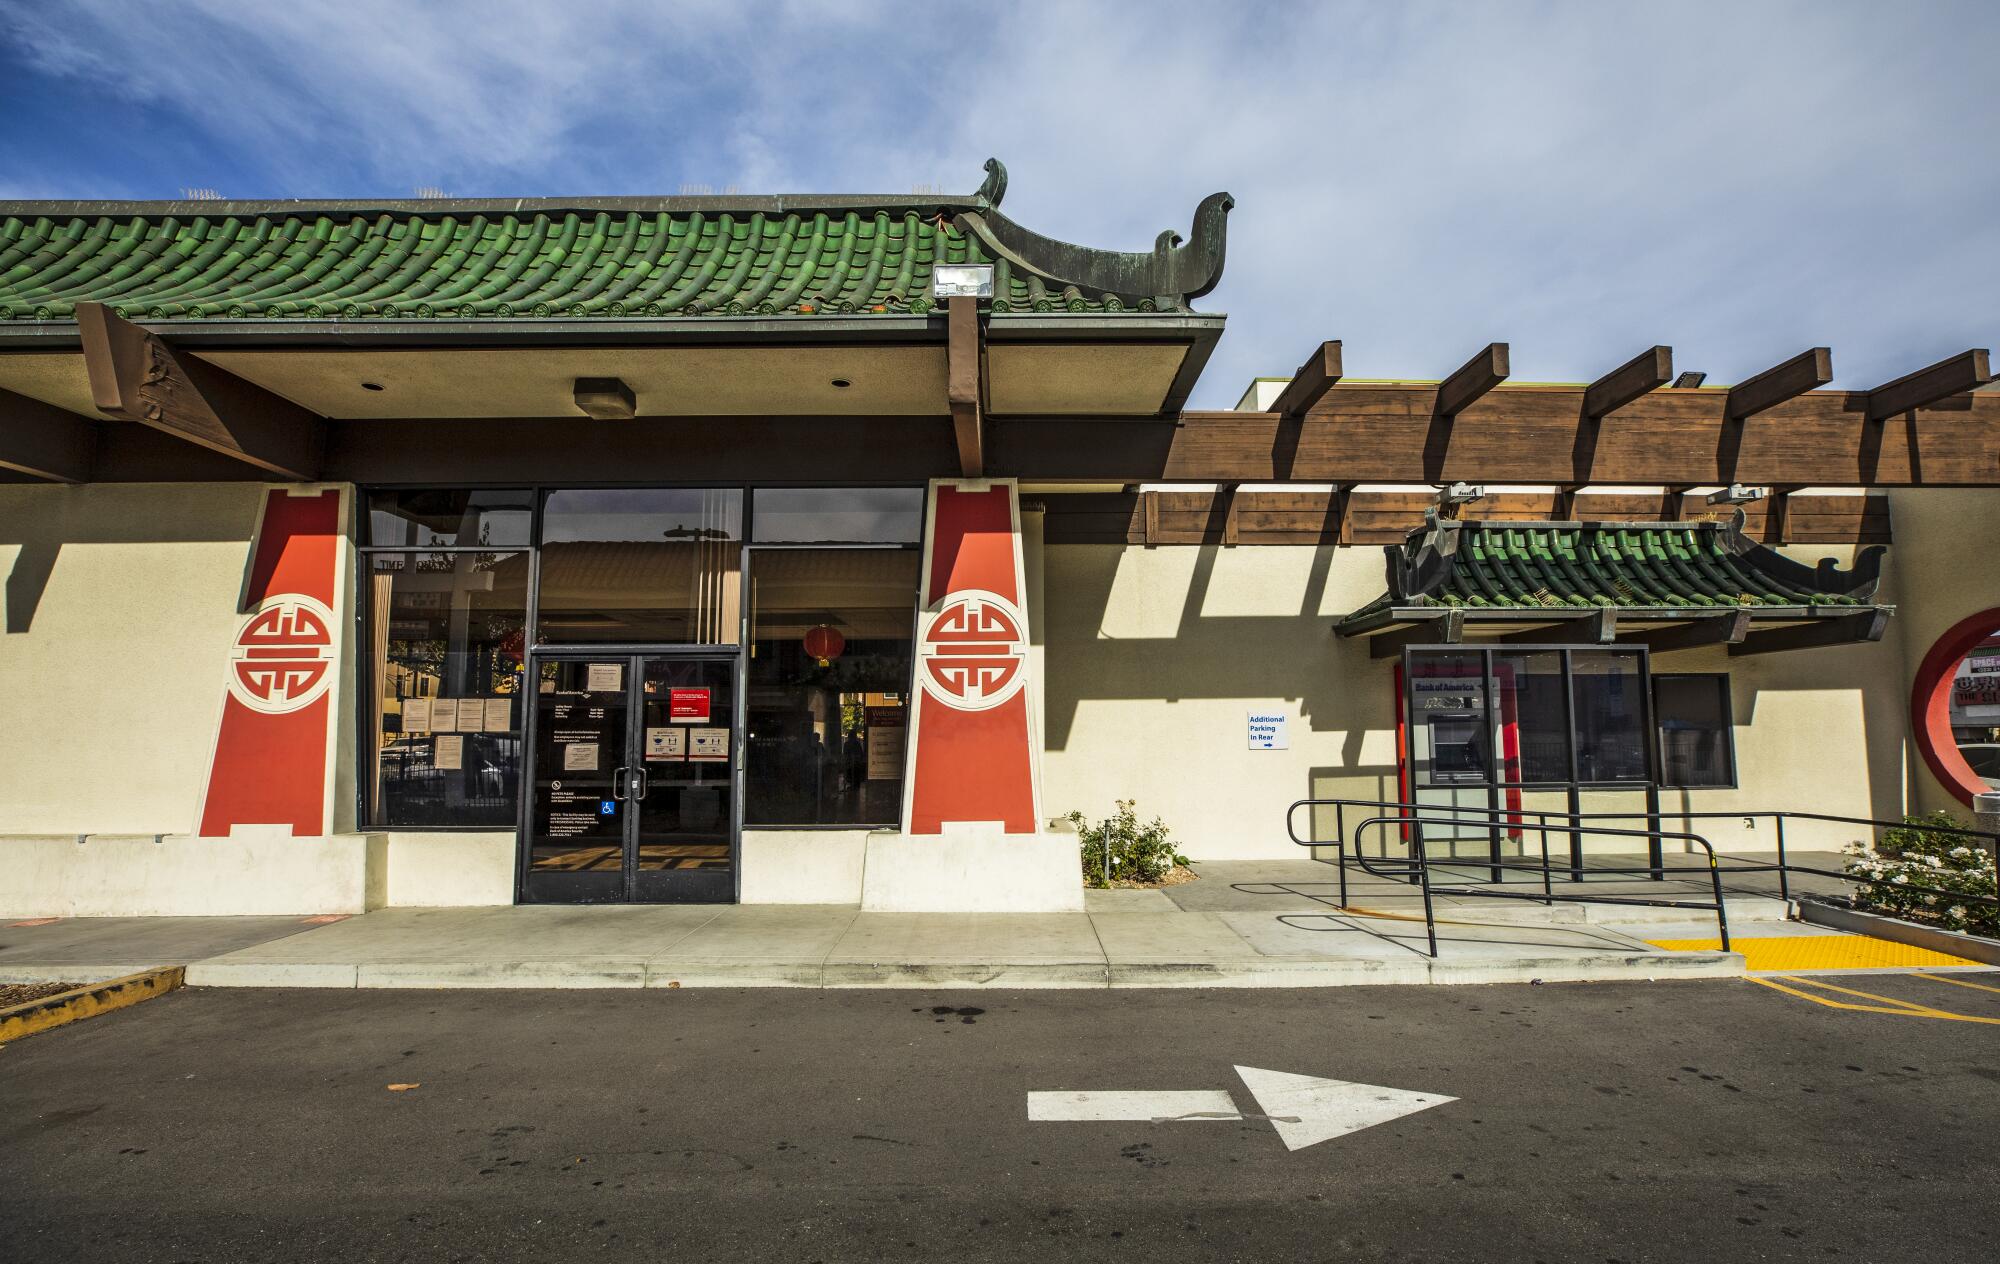 The Chinatown branch of Bank of America with a pagoda-style roof.